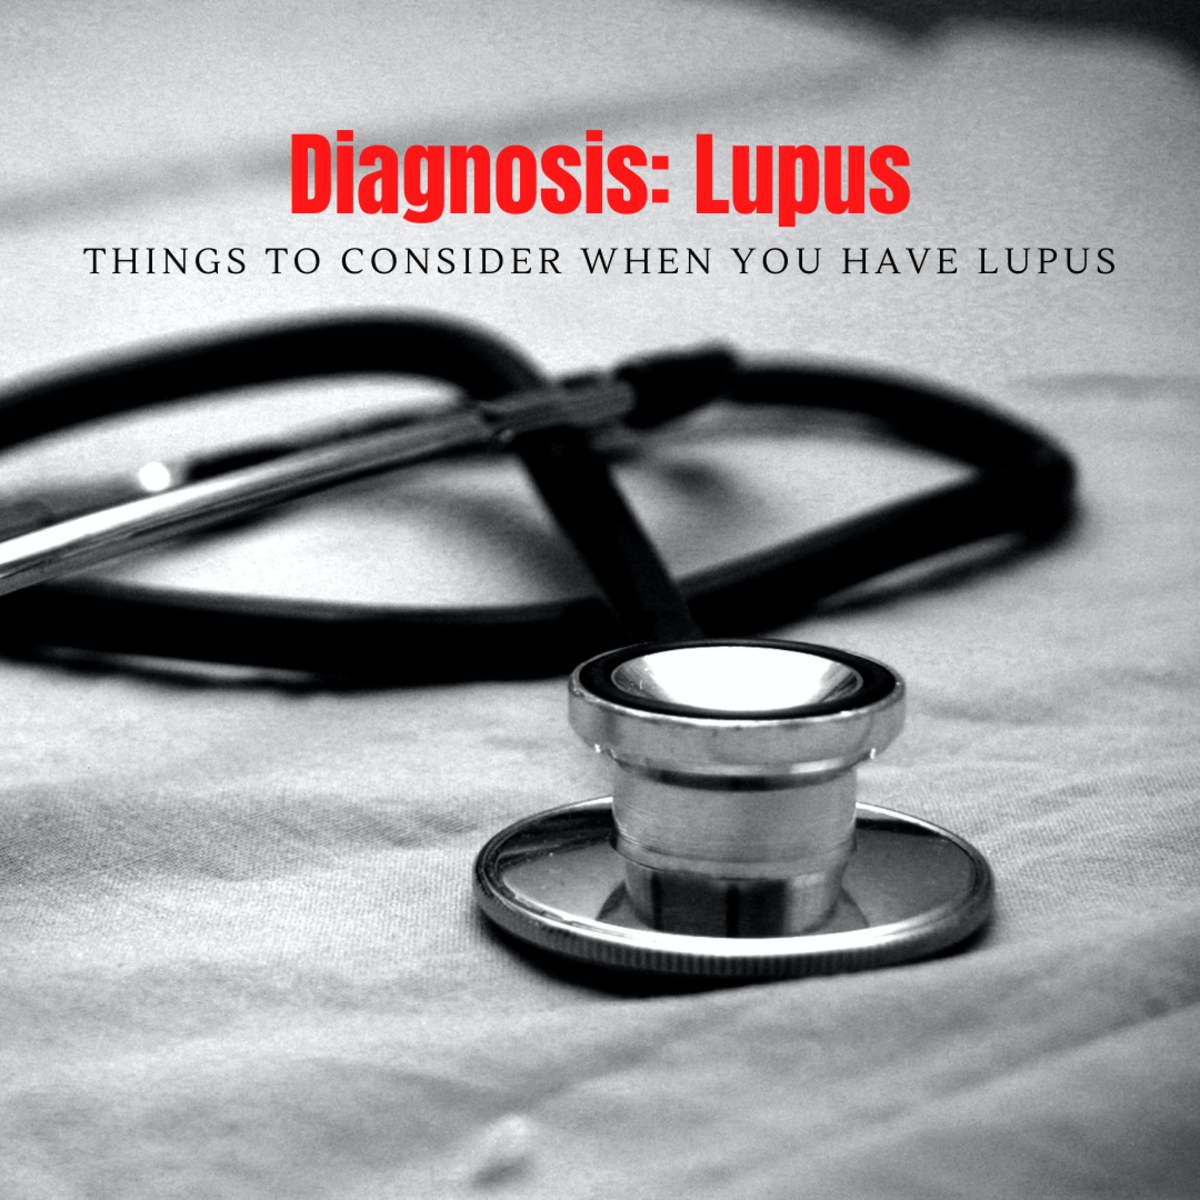 Questions to Ask Your Doctor About Your Lupus Diagnosis